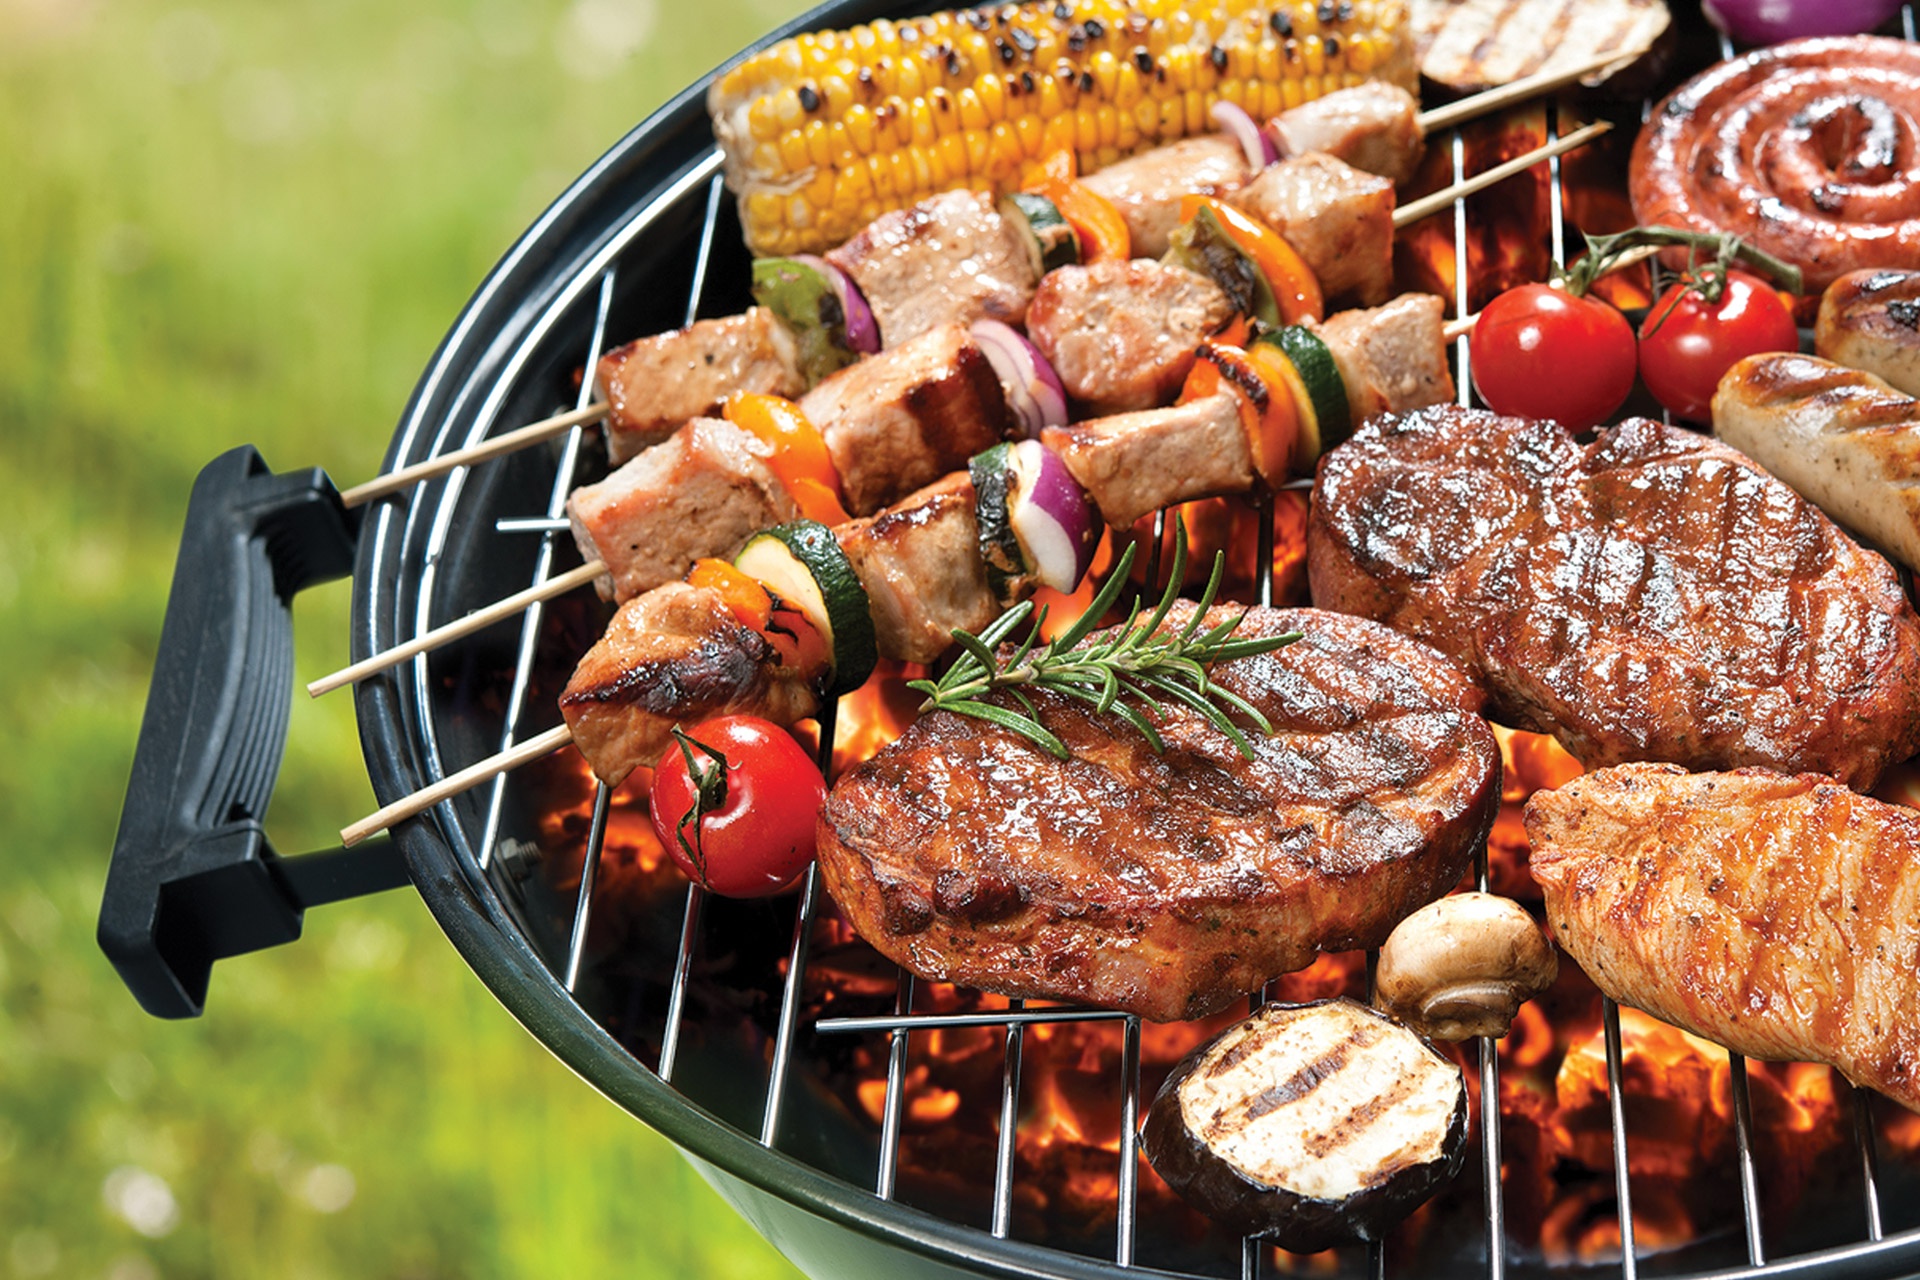 Meat Vegetables Barbecue Grill Corn Cooking Steak Cow Flesh Muscles Animals Tomatoes Mushroom Sausag 1920x1280